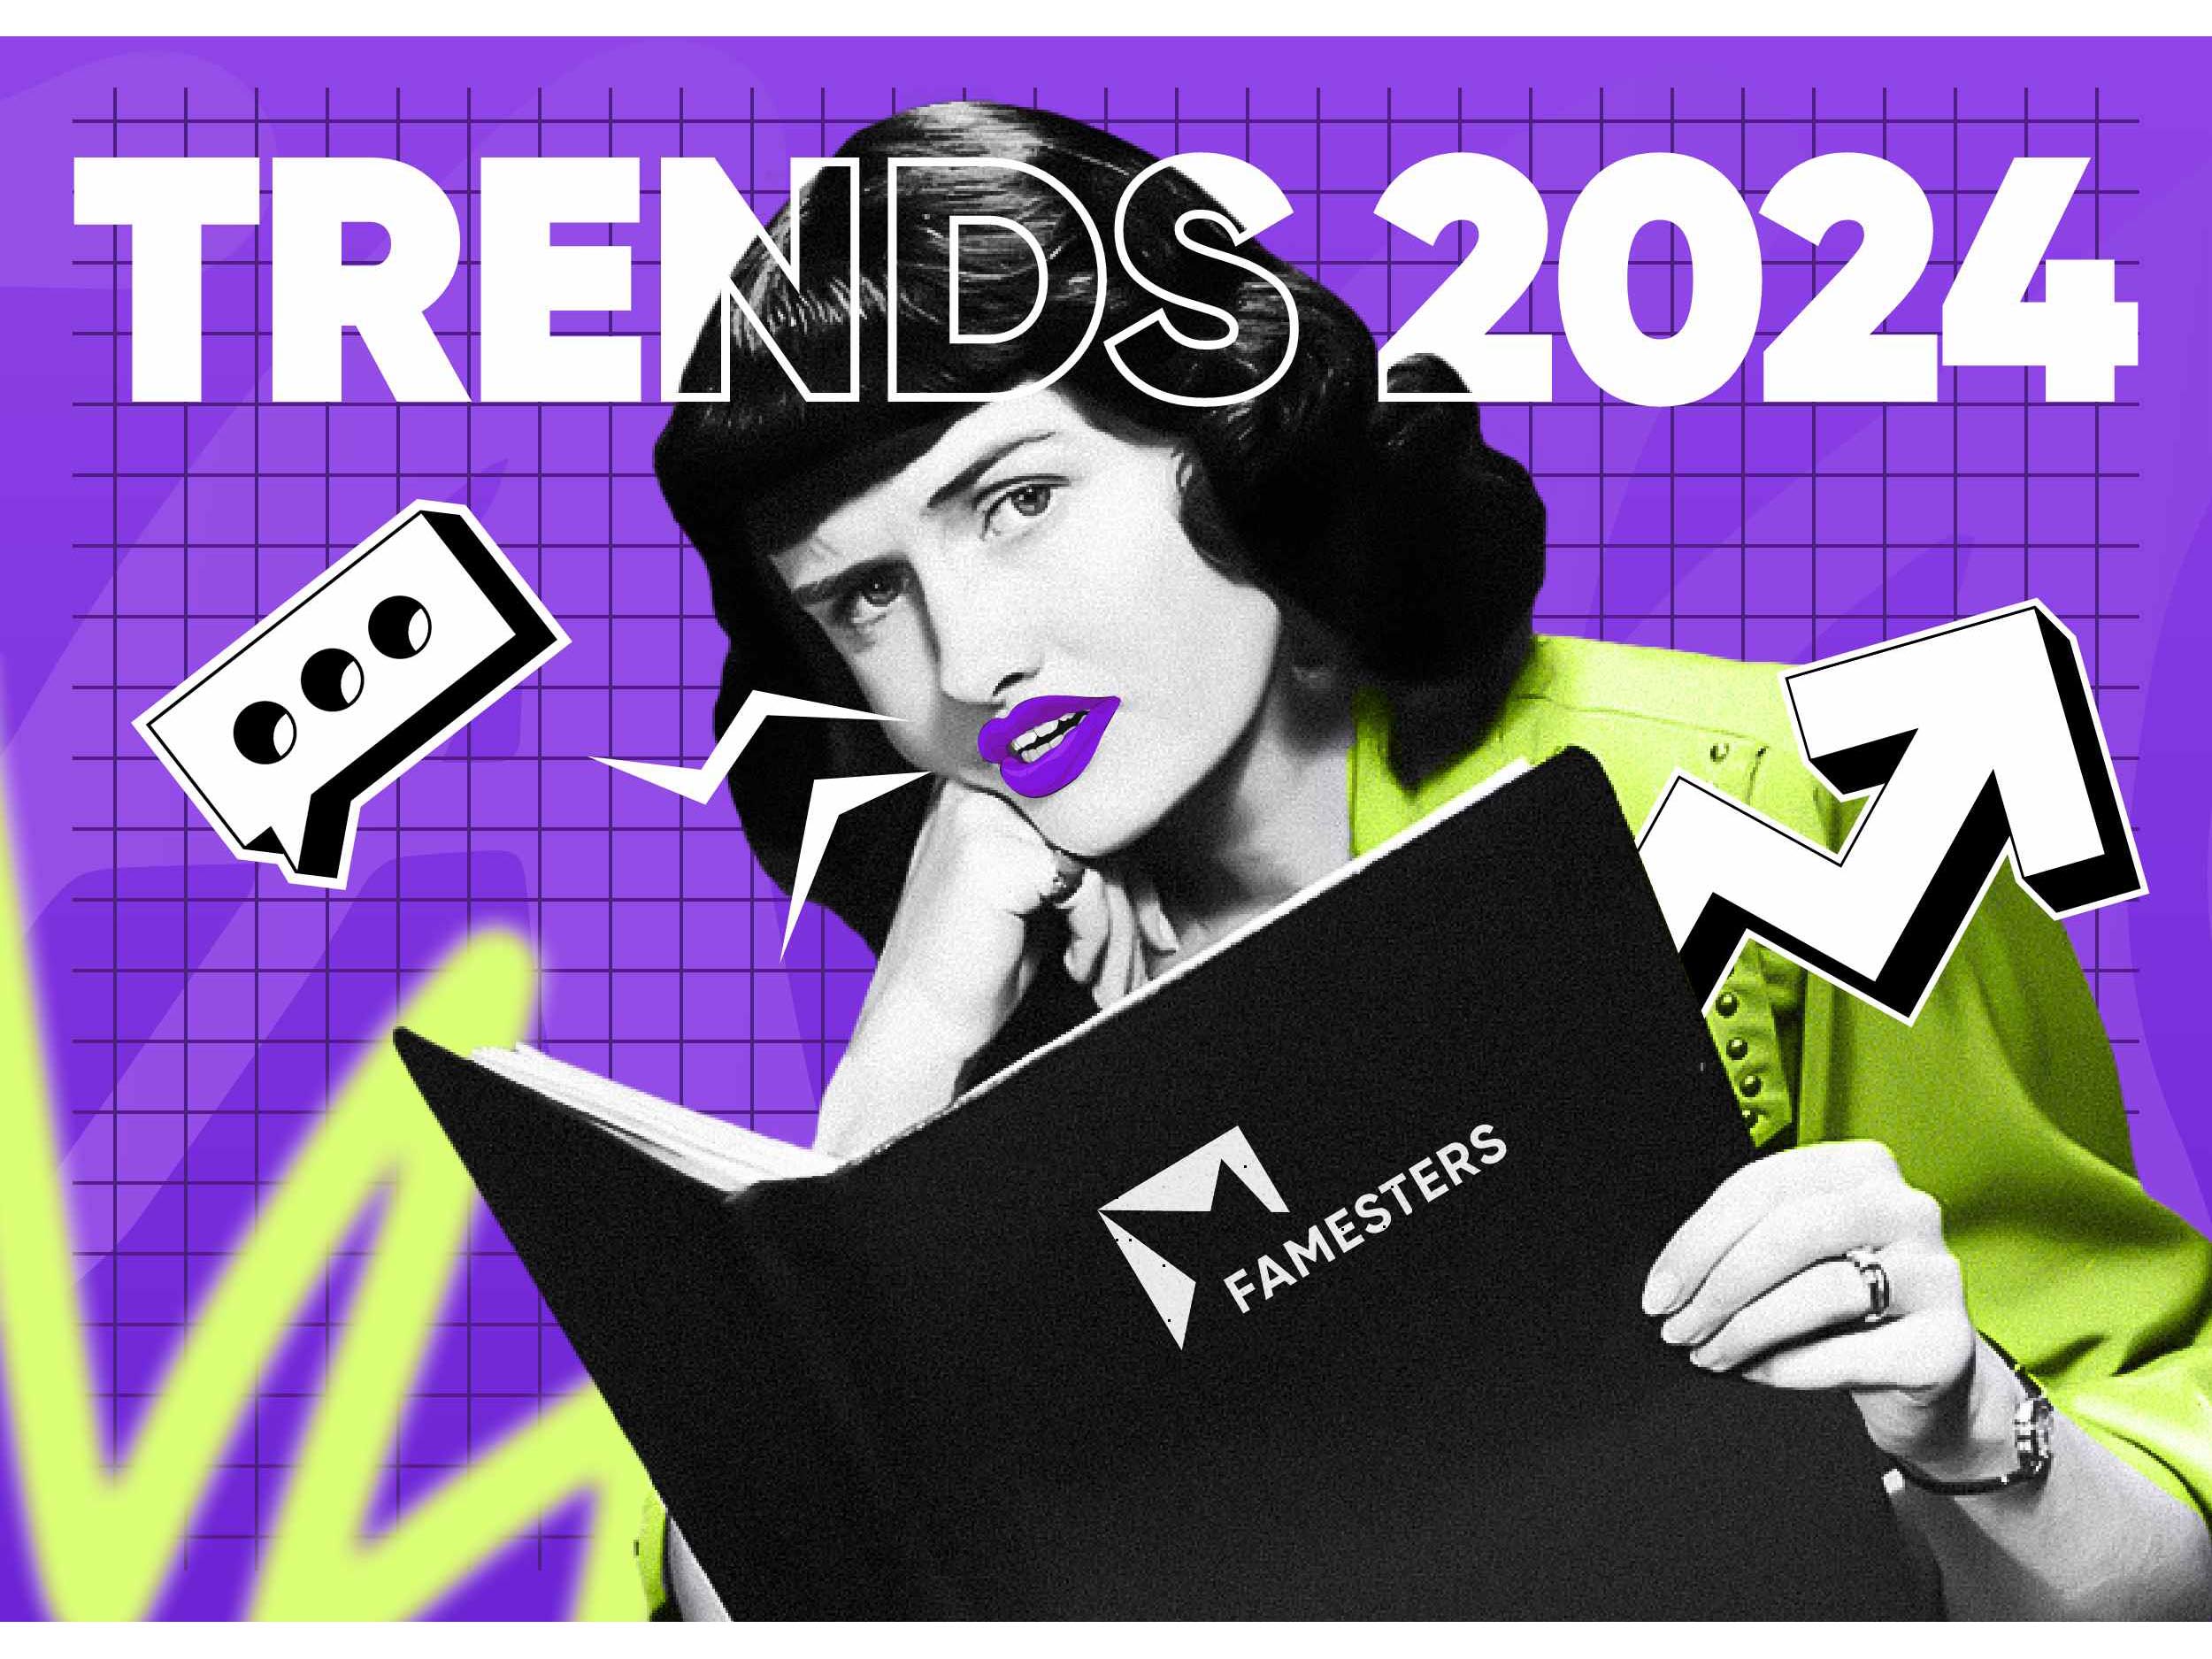 What Will Influencer Marketing Look Like in 2024?